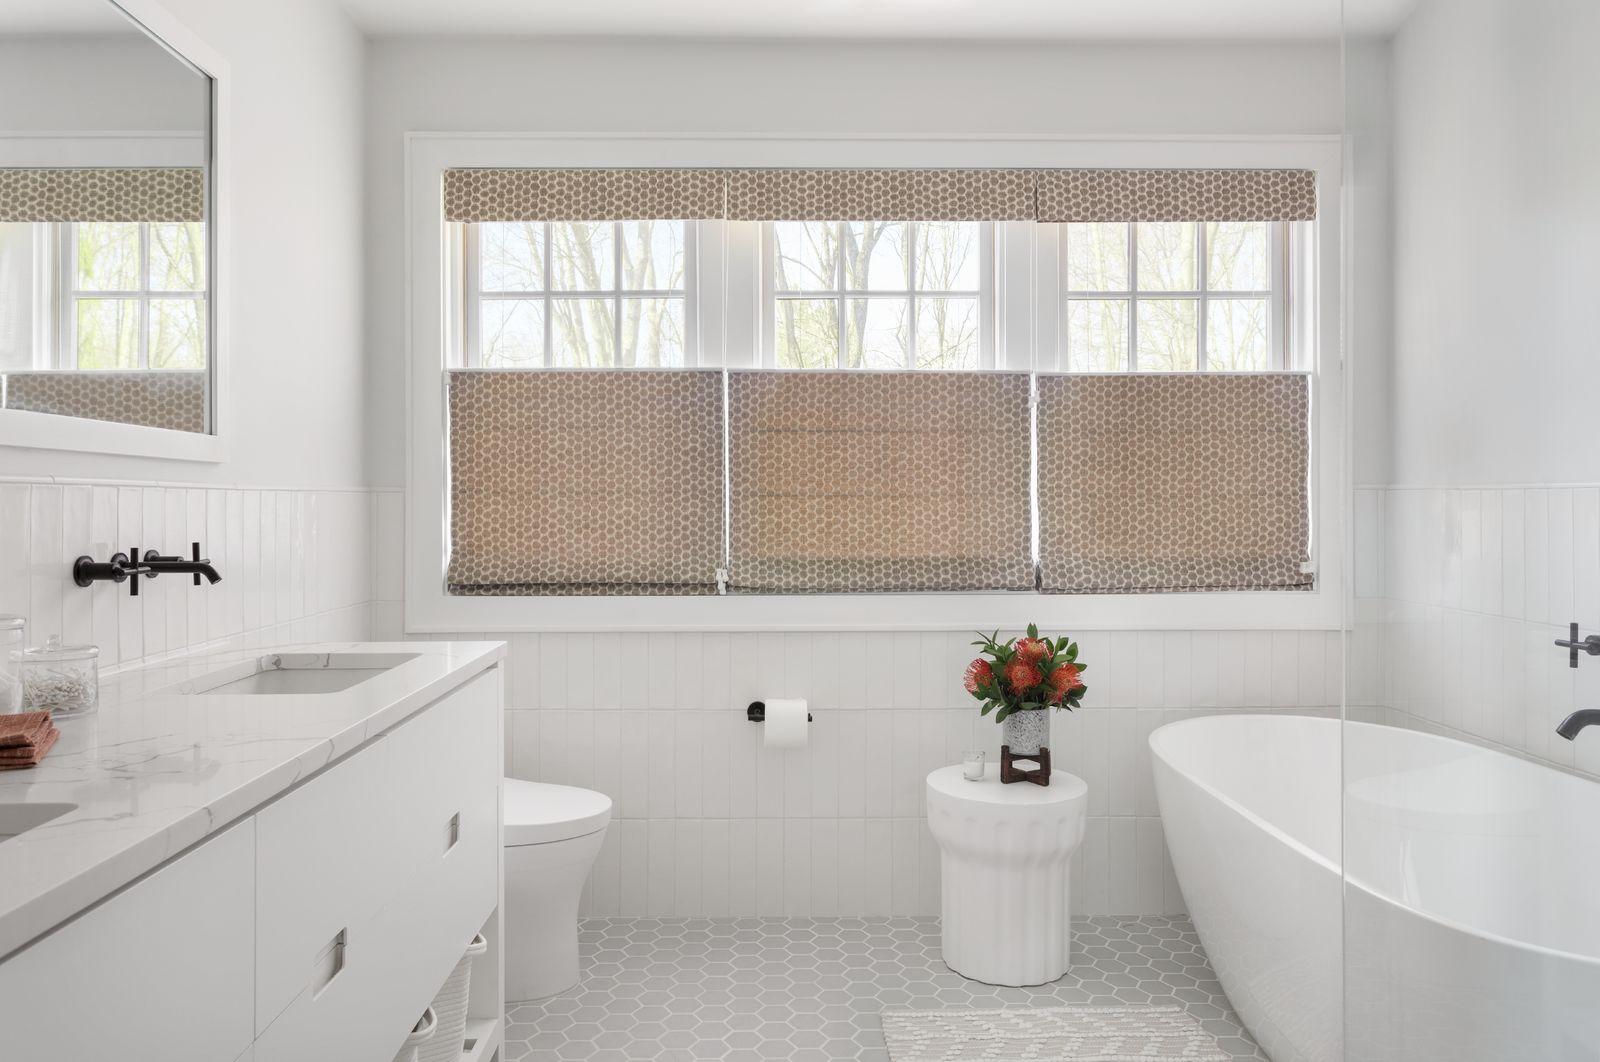 Three side-by-side tan top-down bottom-up roman shades allow light to come in from the top of the shades in a large, modern bathroom